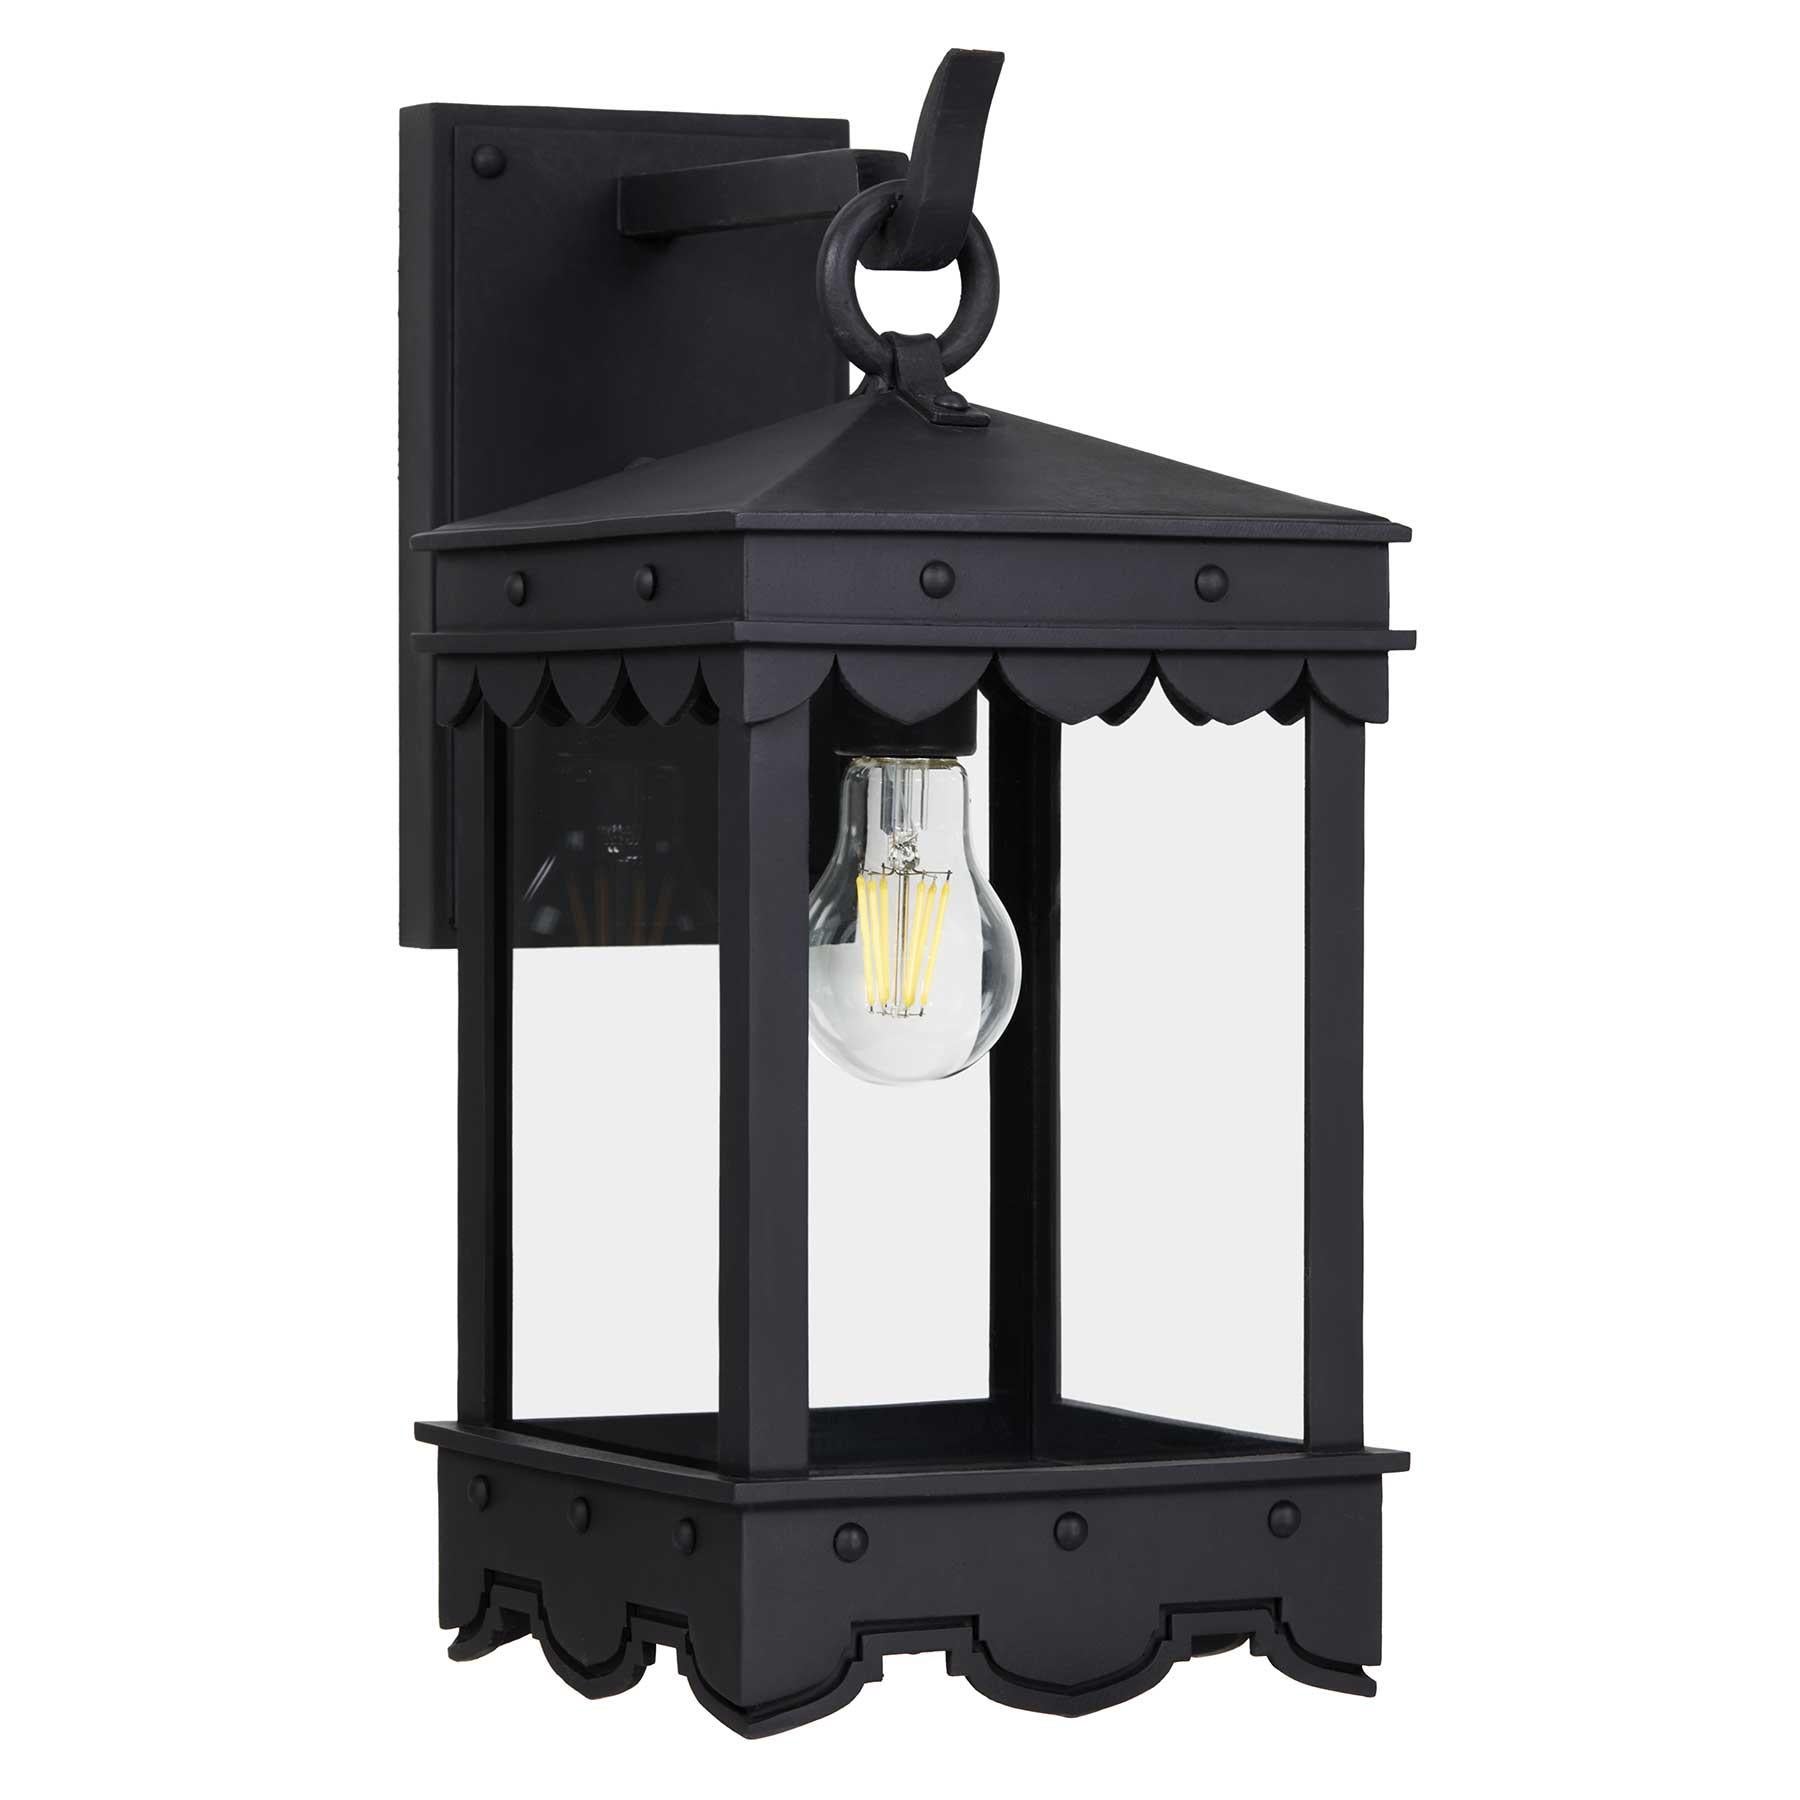 Our De La Guerra lantern has Mediterranean style precedence with historic profiles and contemporary geometric lines. A striking fixture during the day but even more so at night when the patterned hem casts intricate shadows. The 04 is the square